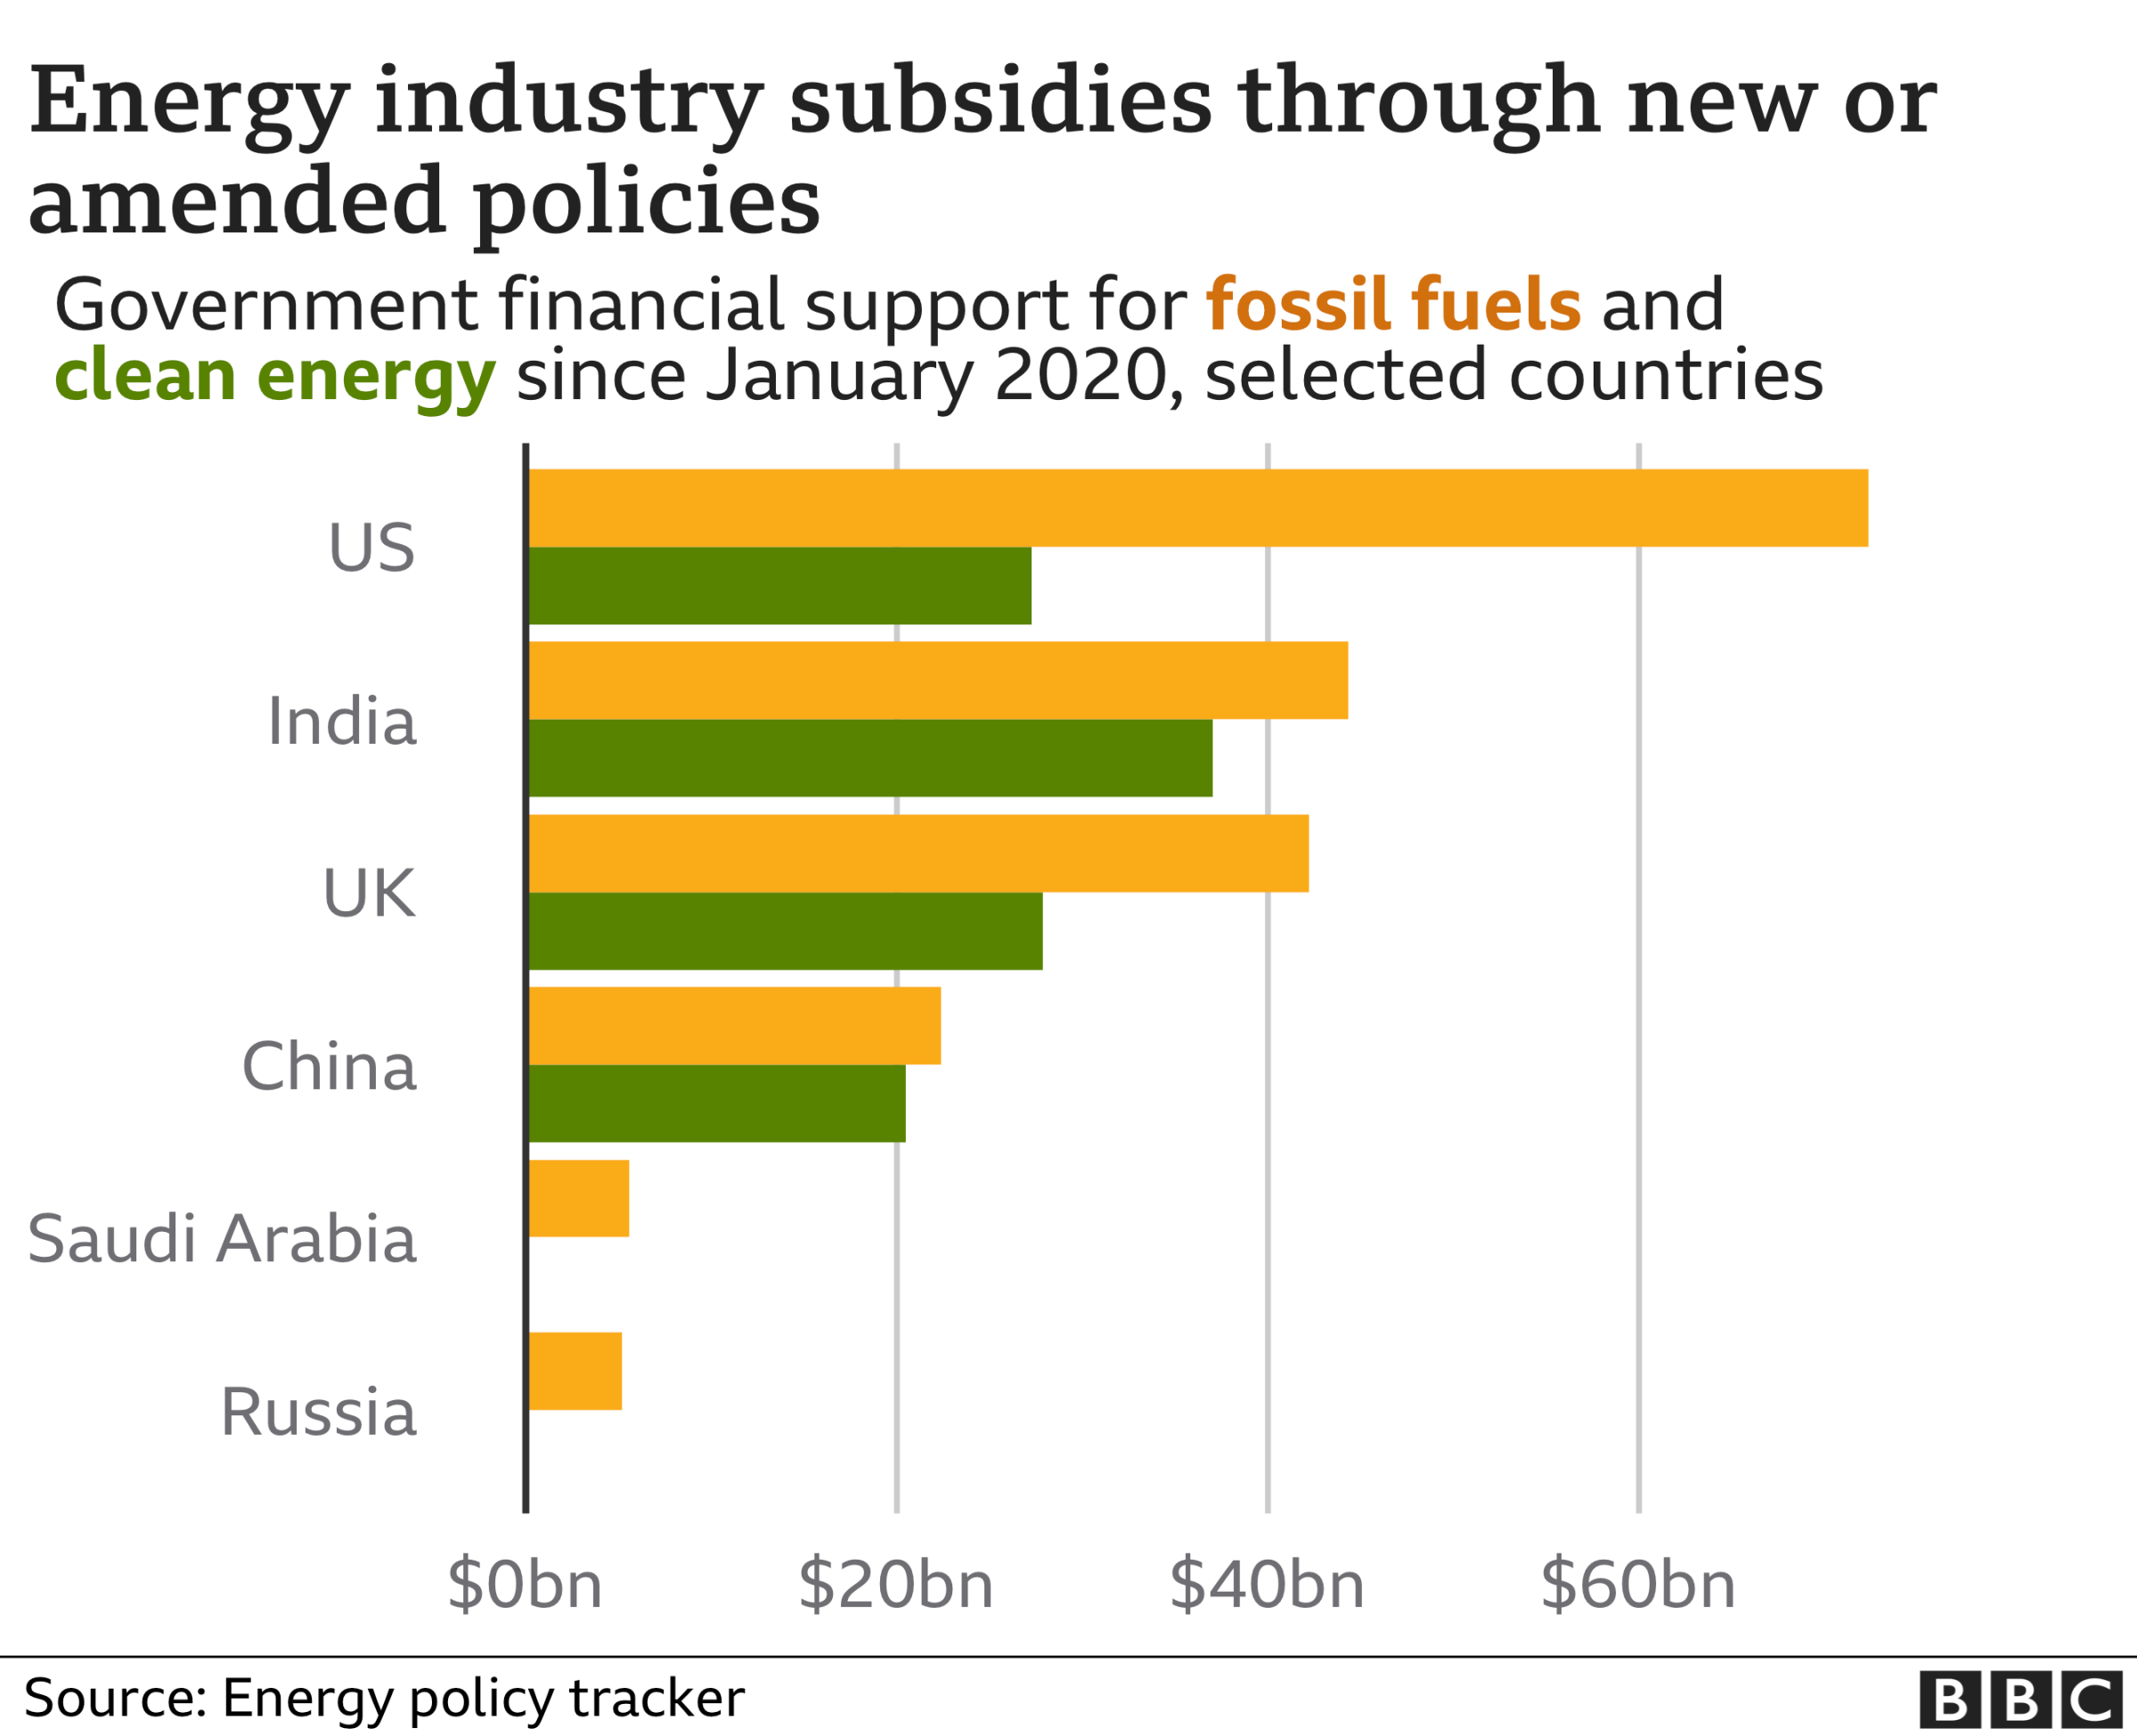 COP: How much is spent supporting fossil fuels and green energy